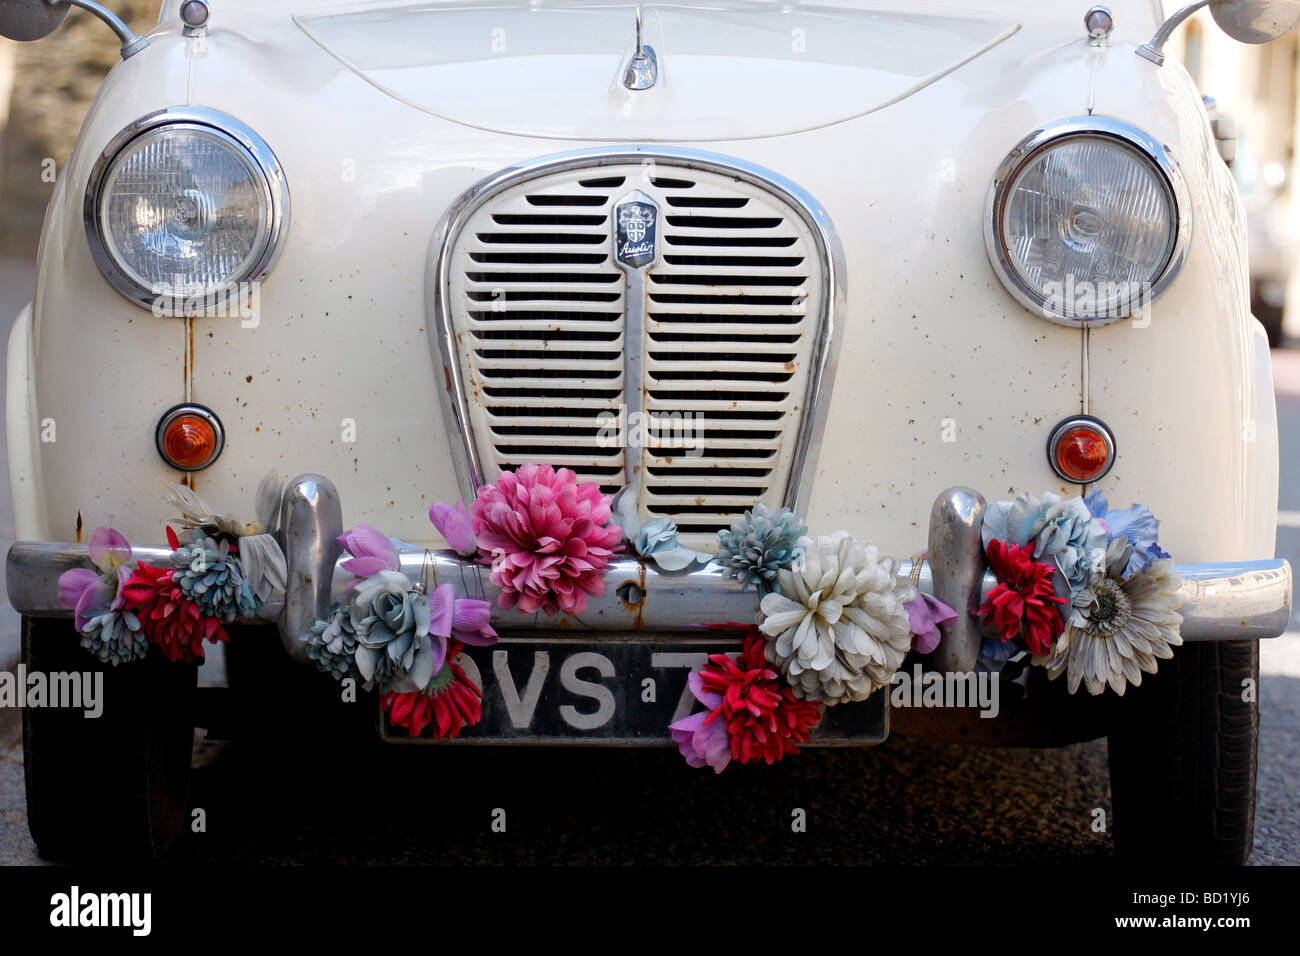 Old Austin A30 car with flowers on its bumper Stock Photo